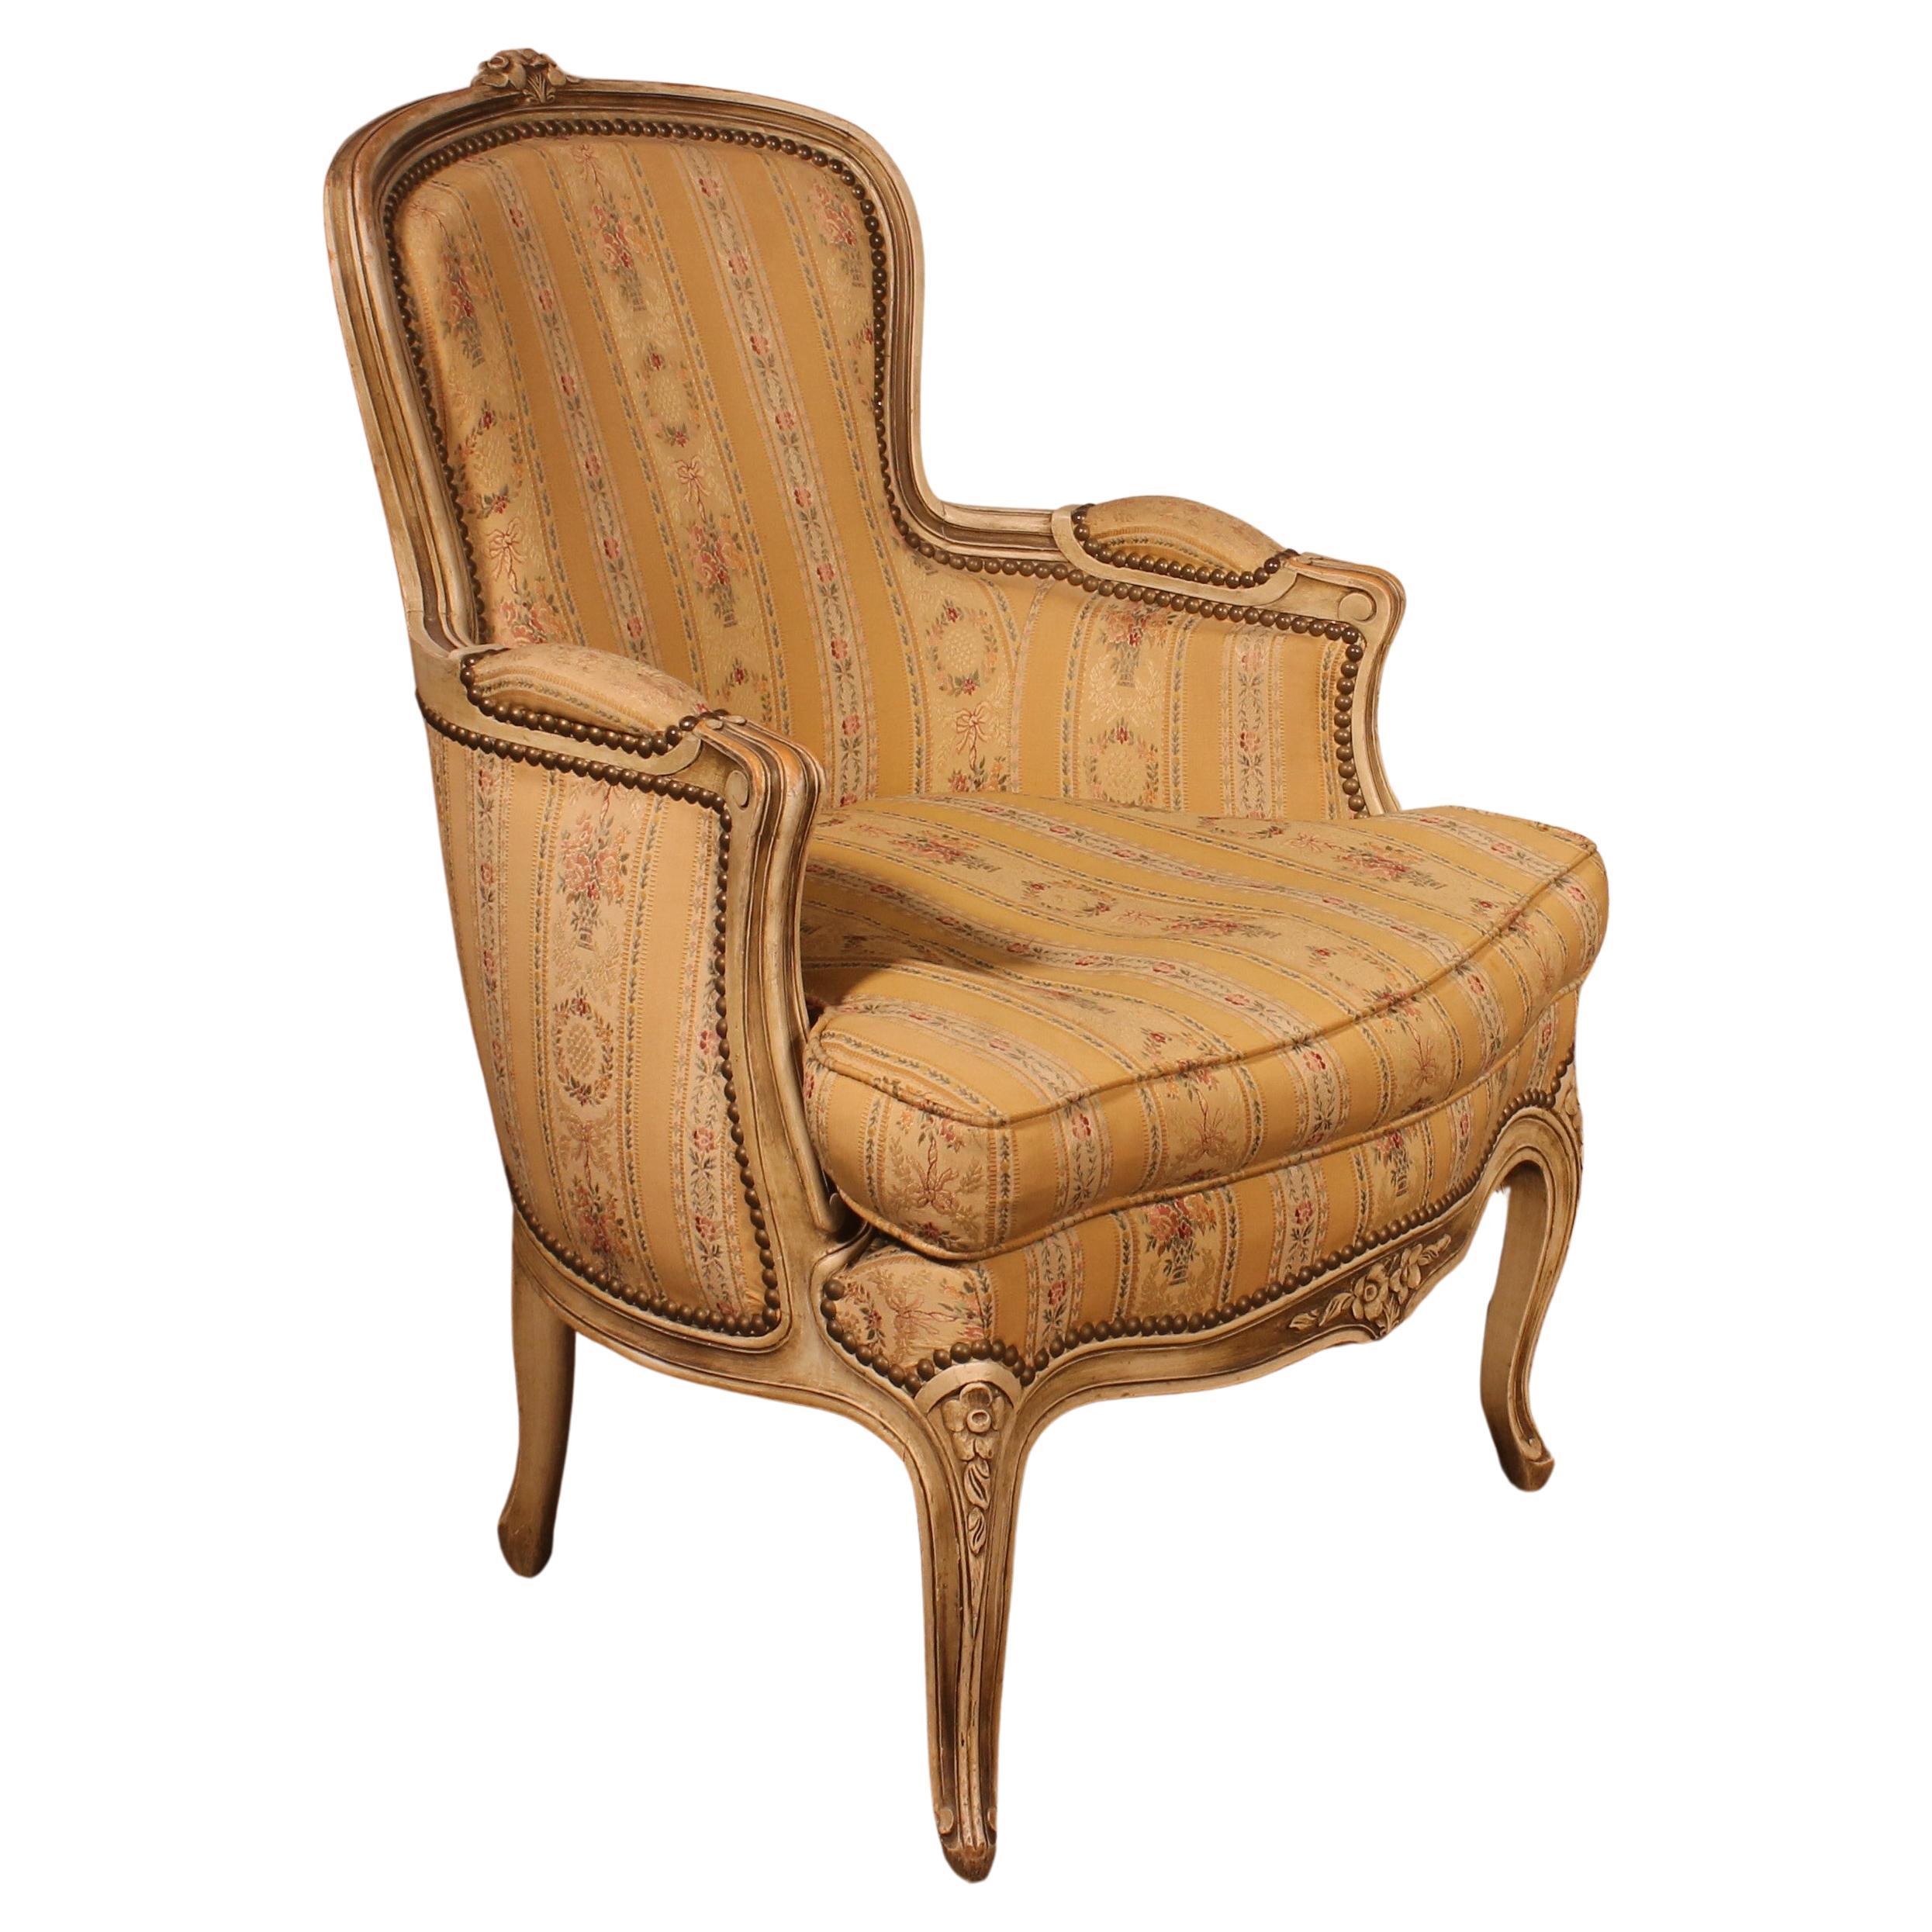 Ladies Louis XV Parlor Chair For Sale at 1stDibs